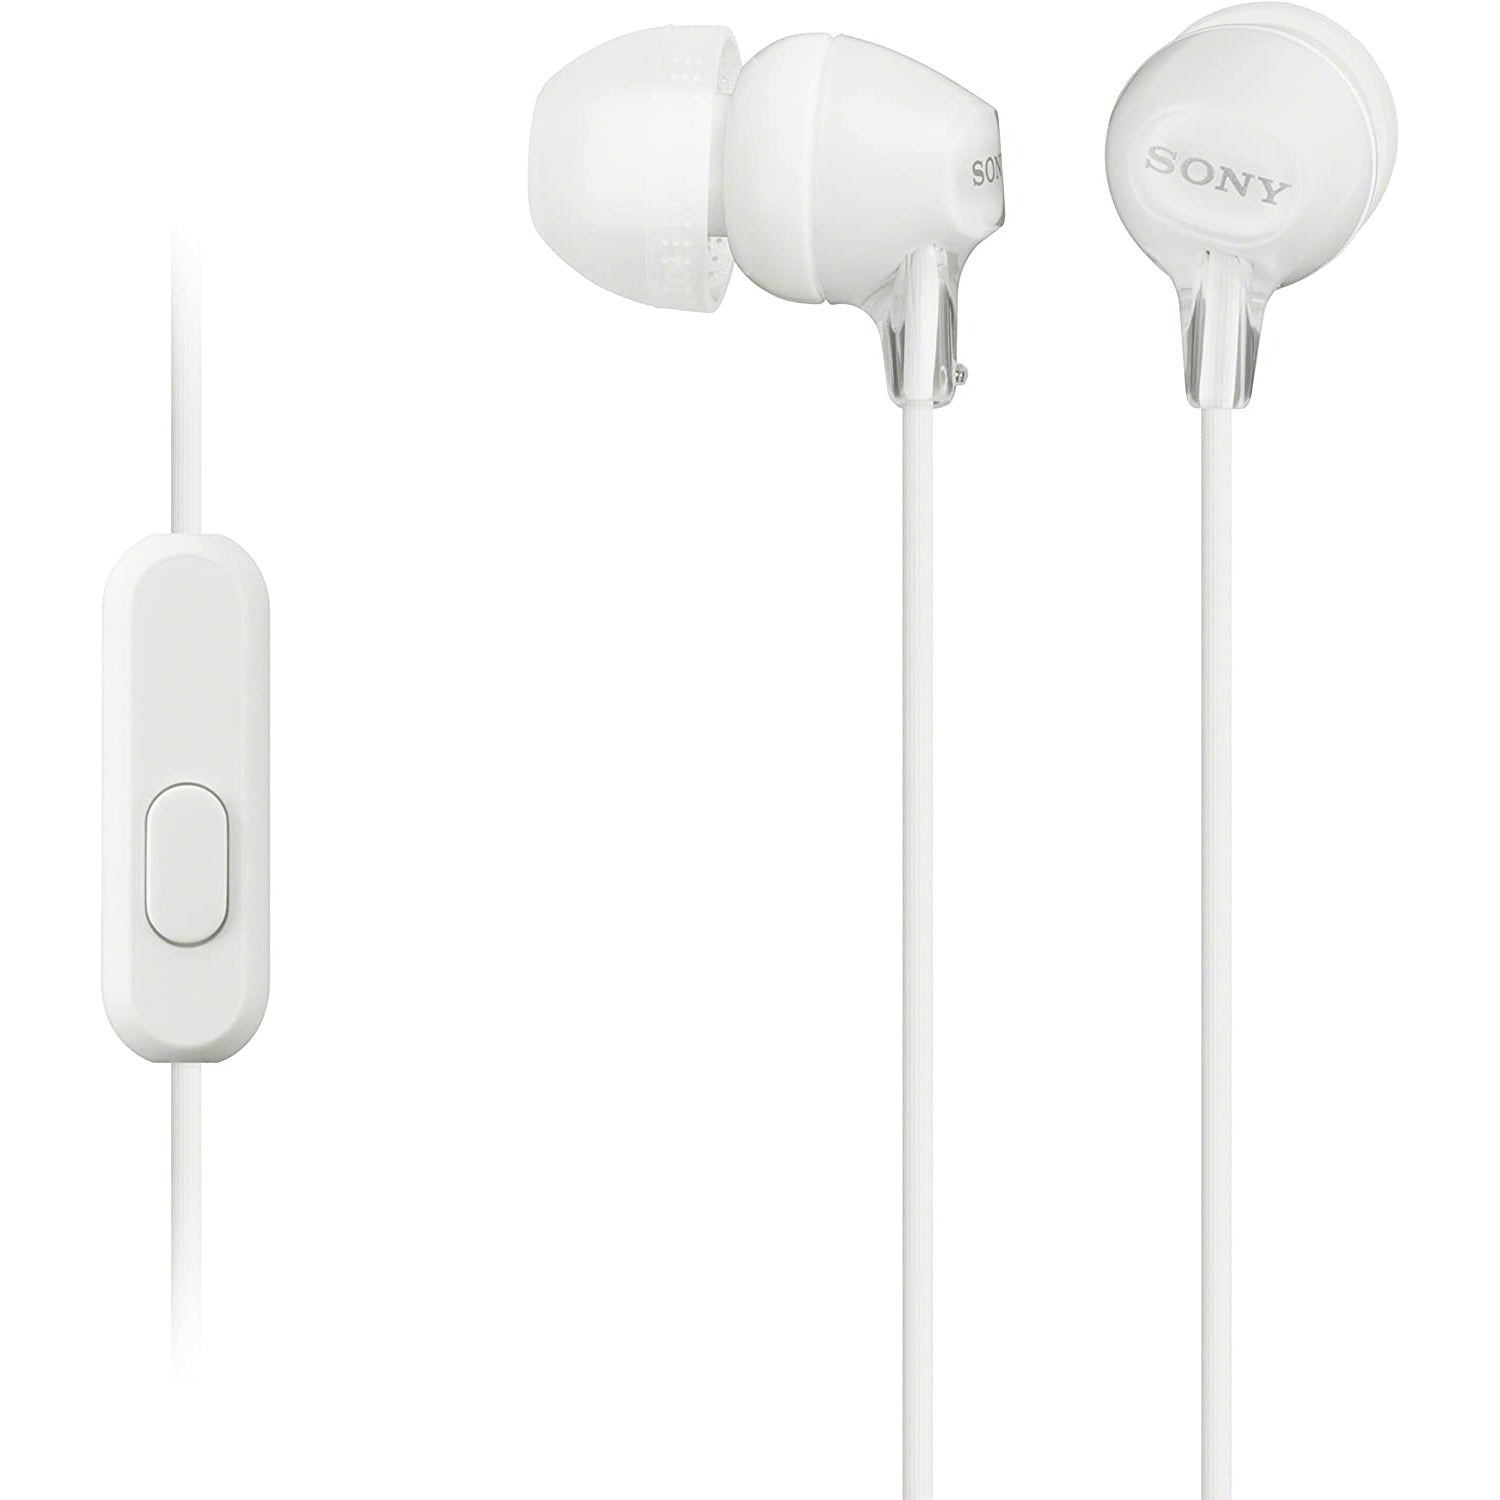 Sony MDR-EX15AP In-Ear Headphones with Mic/Remote - White - Refurbished Good